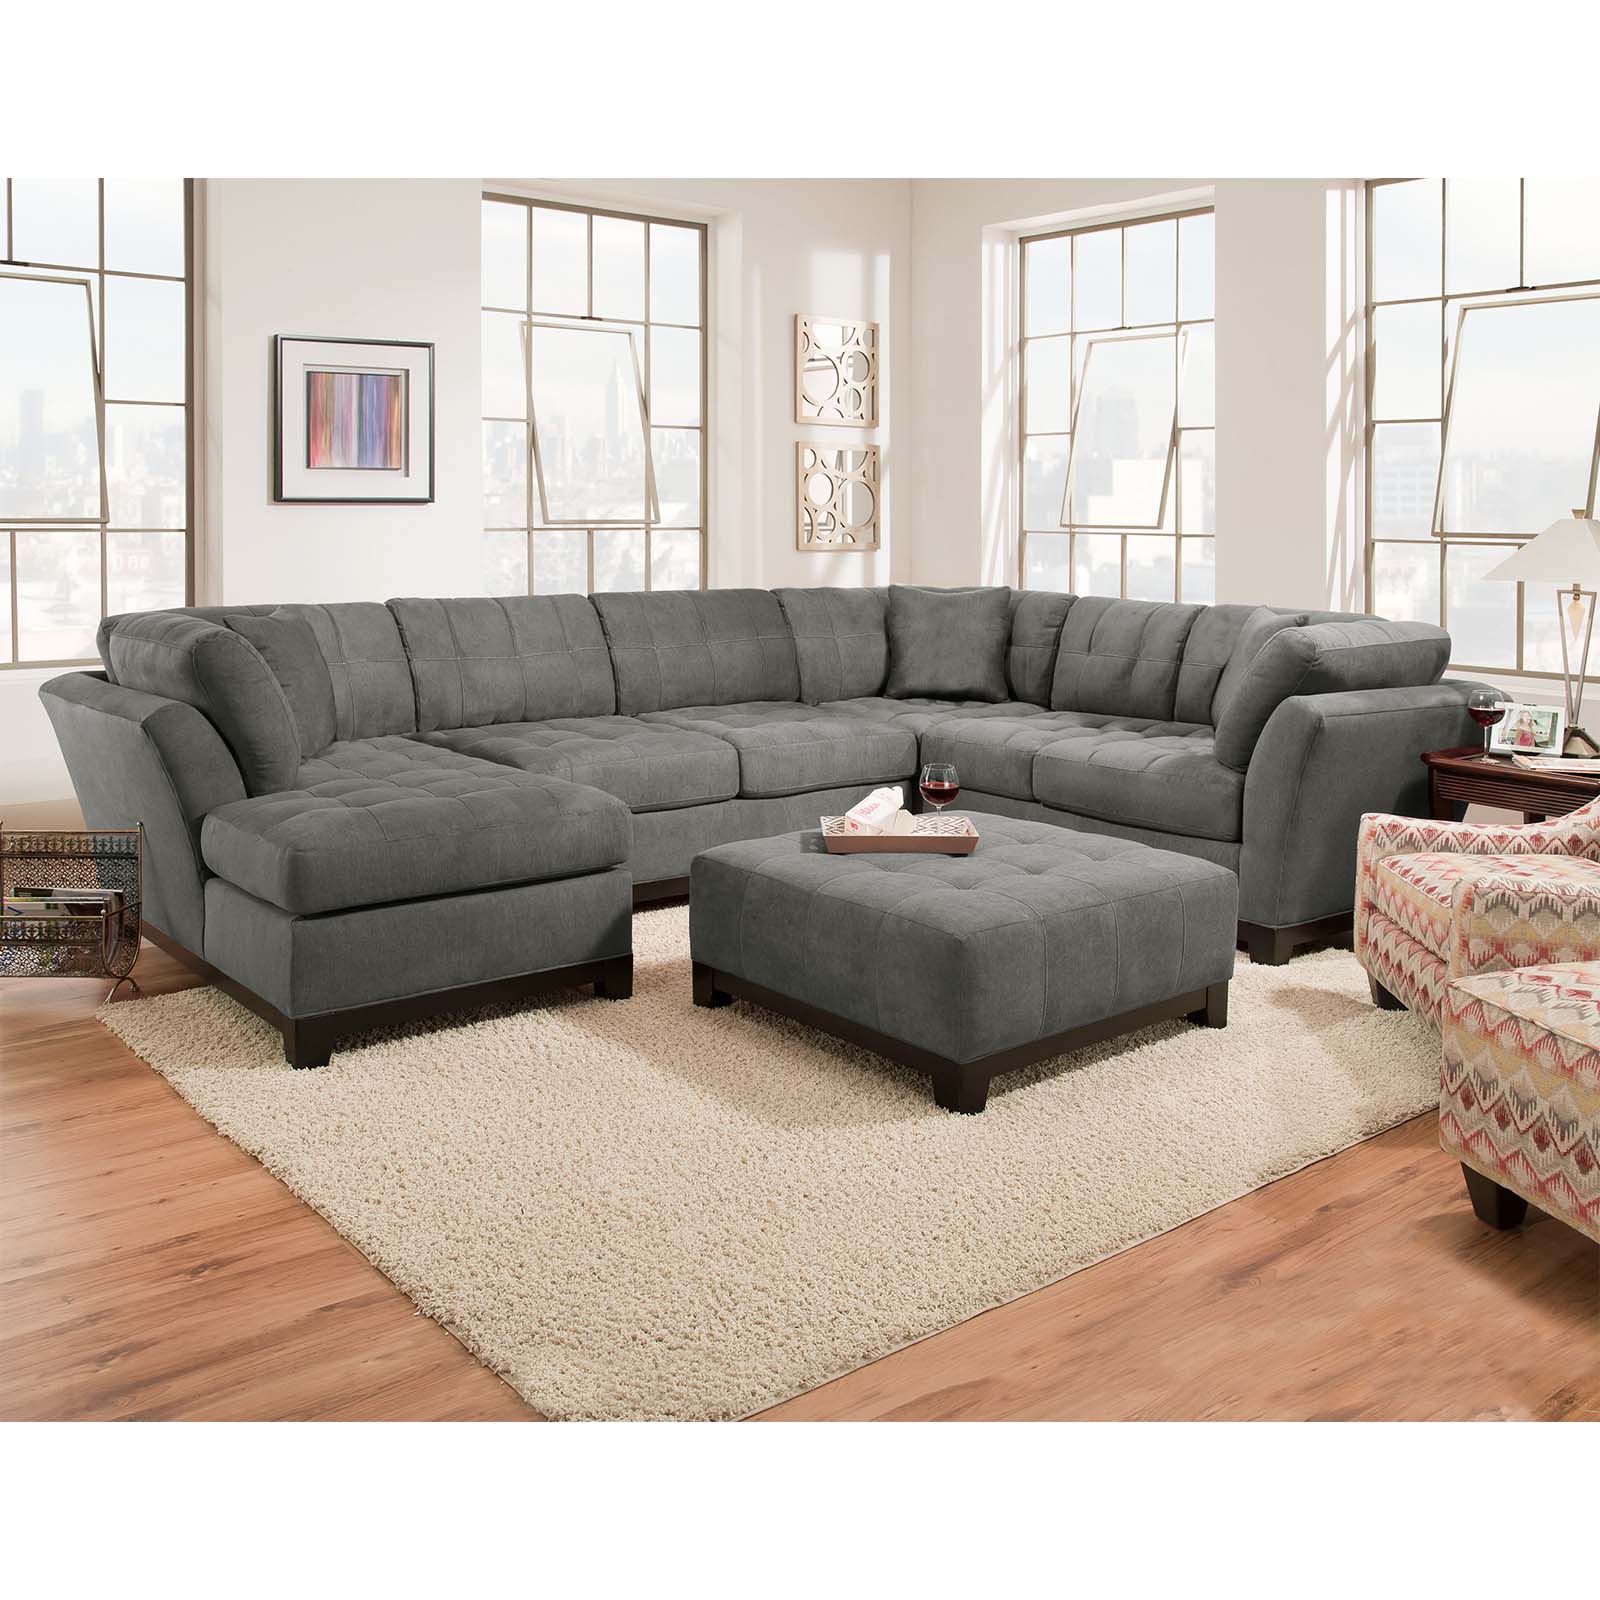 Corinthian Furniture Loxley Left Side Facing Chaise Sectional